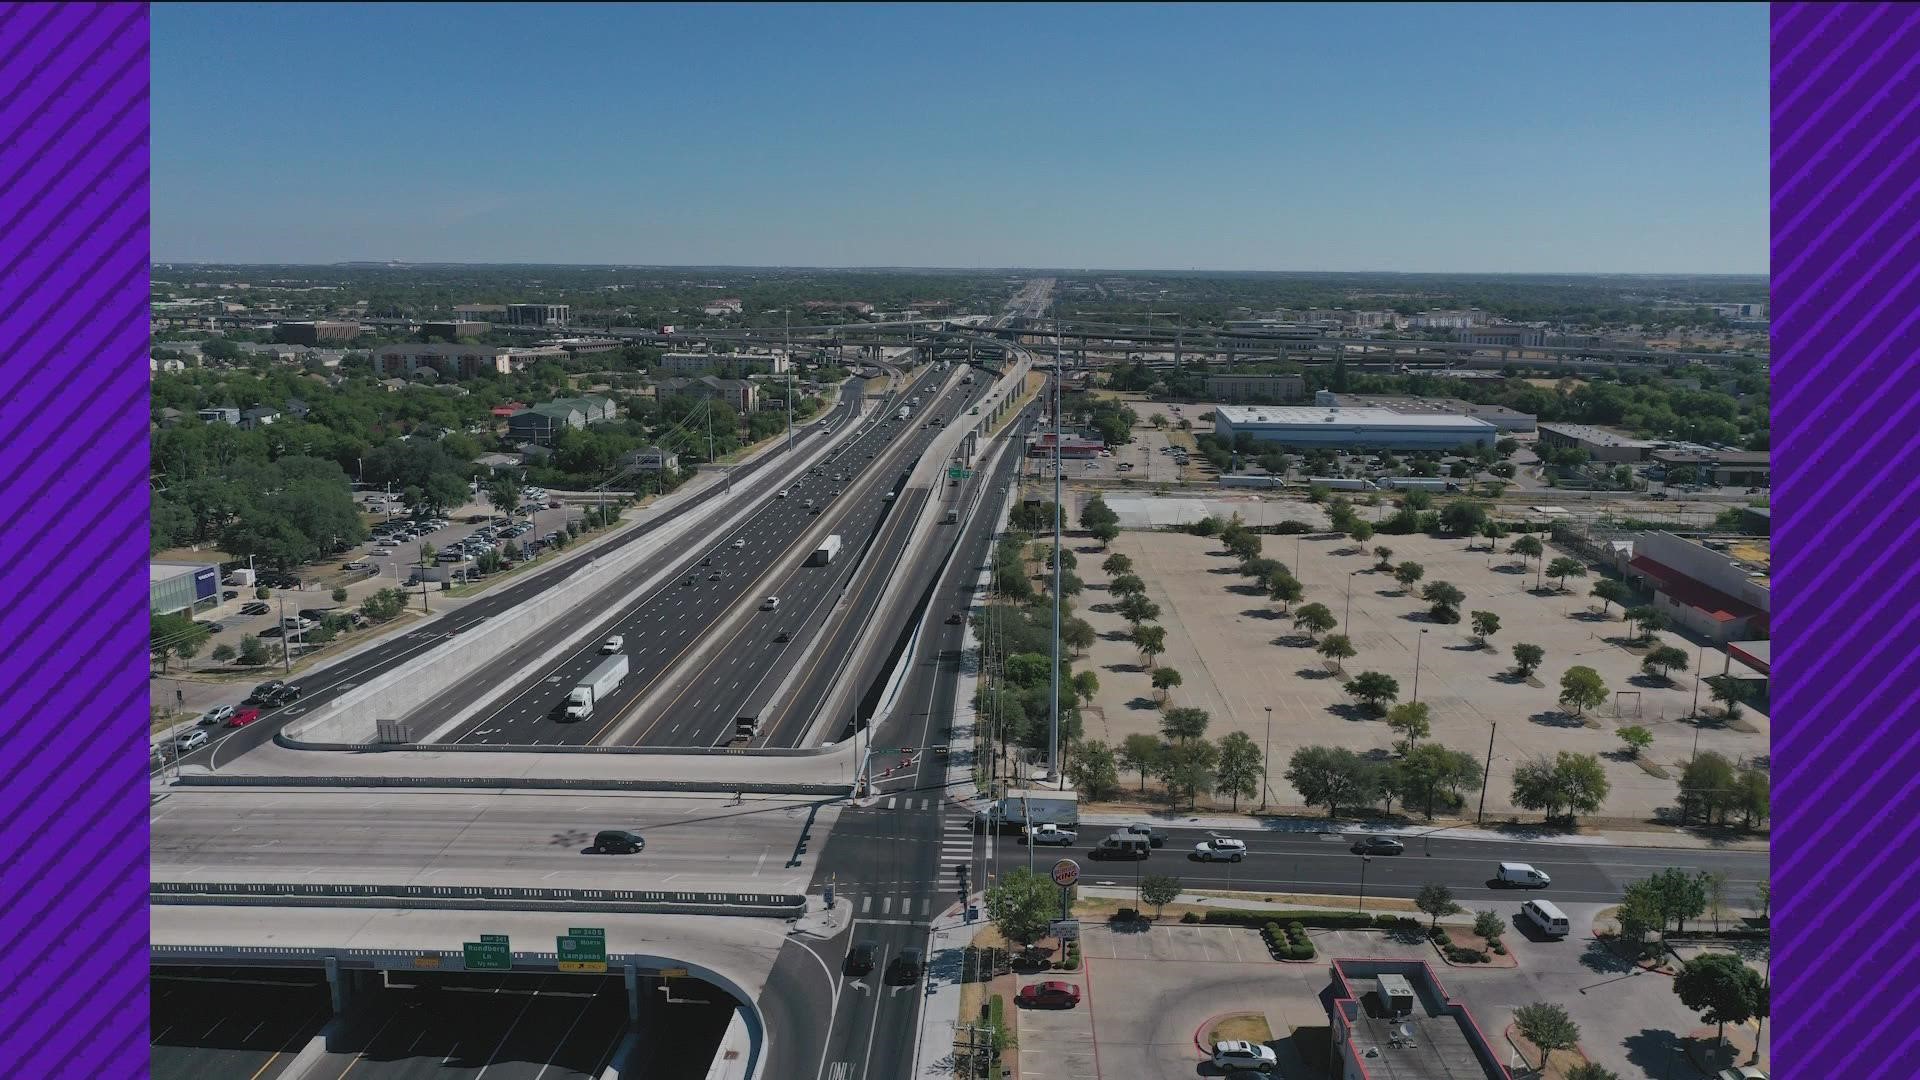 The Texas Clear Lanes-funded project added three new flyovers and reconstructed the existing northbound I-35 and northbound US 183 flyover at I-35 and US 183.